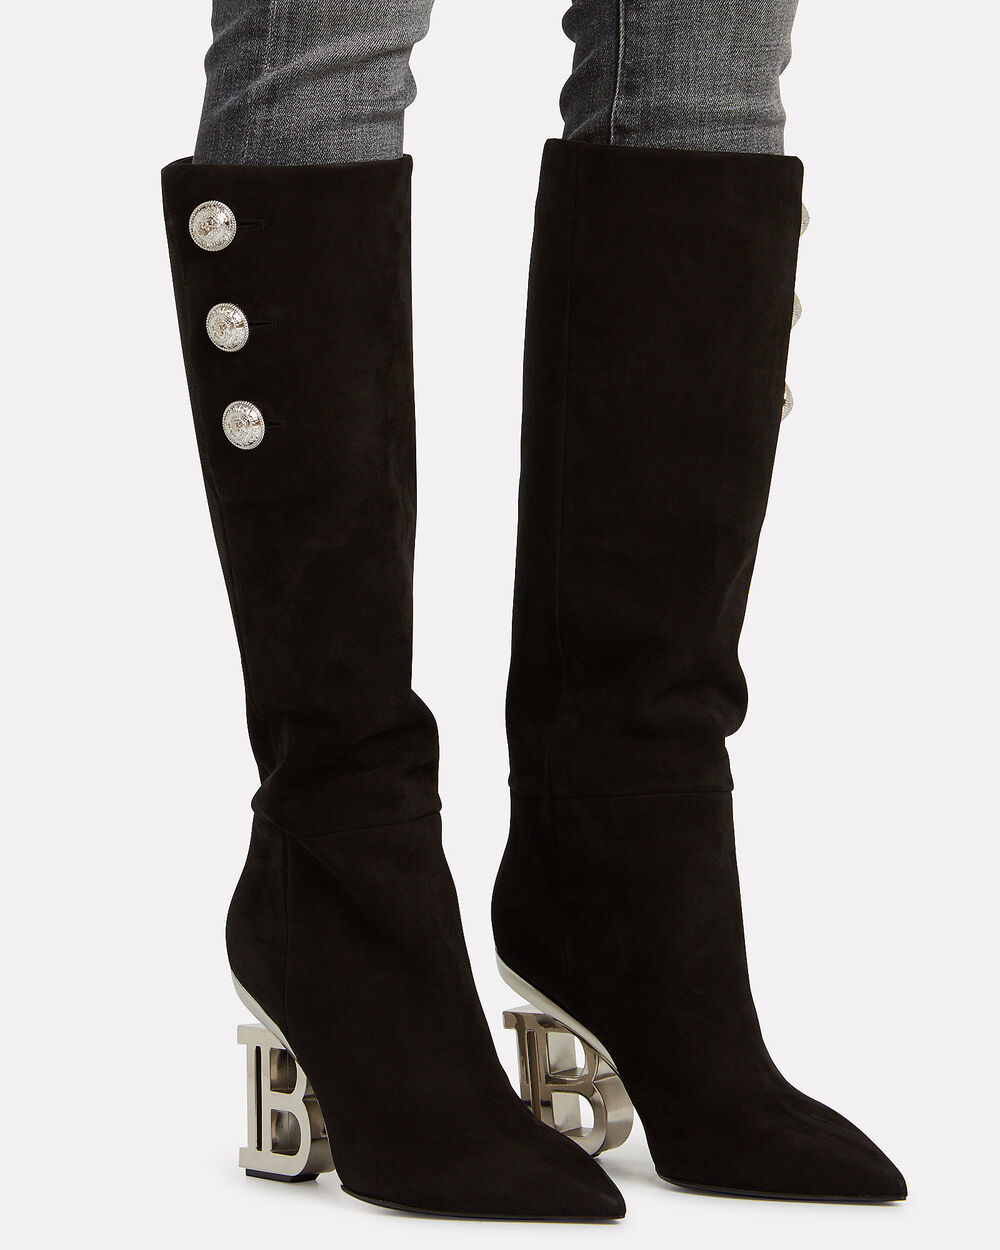 Unique Footwear Statements: Balmain Boots with a Signature B Heel